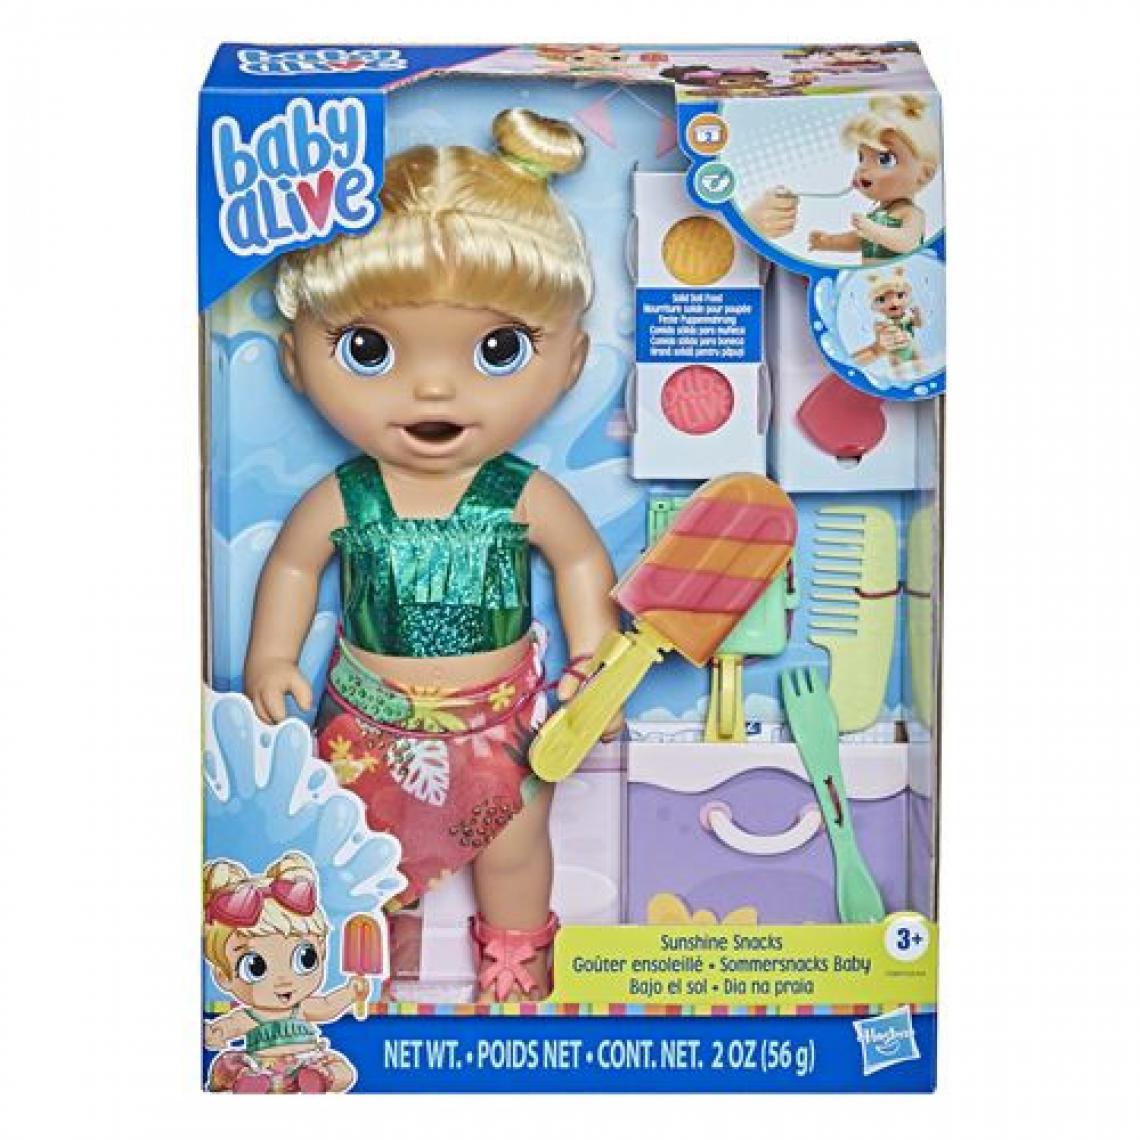 Hasbro Gaming - Poupon Hasbro Gaming Baby Alive gouter ensoleille cheveux blonds - Poupons